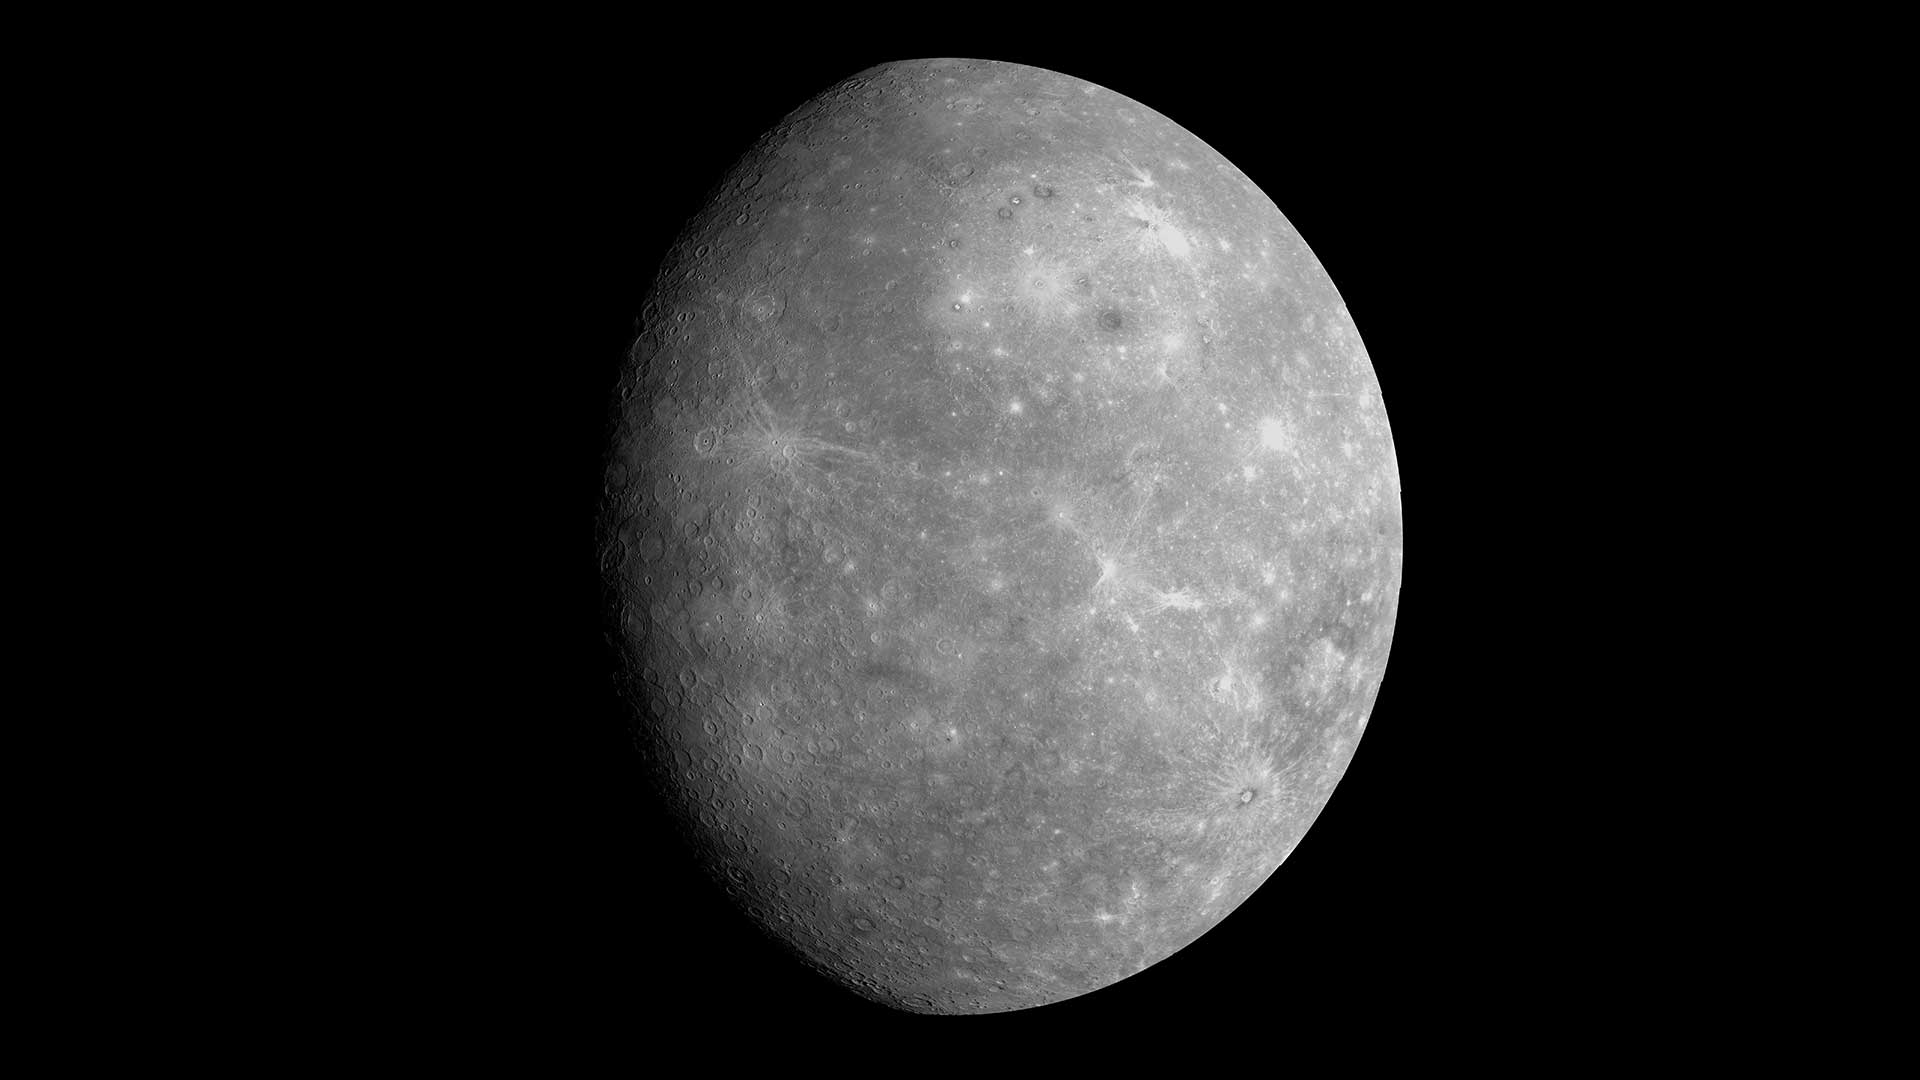 Mercury is gray with bright white patches, and craters visible in this image from the MESSENGER spacecraft.